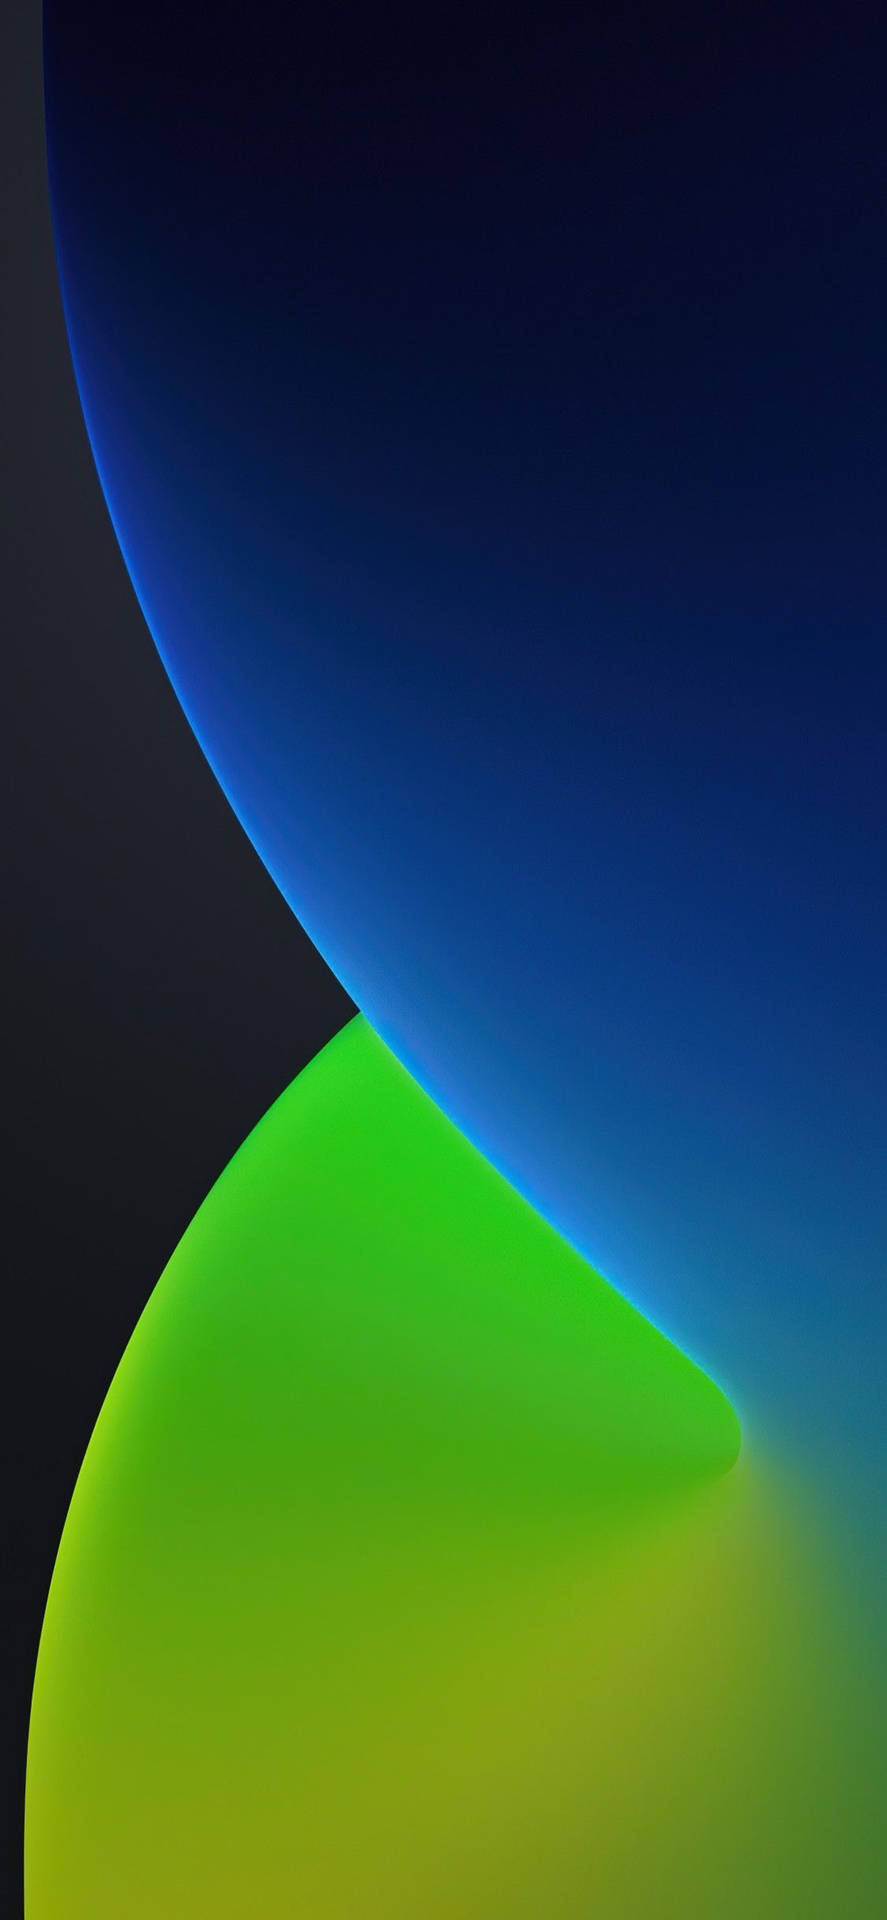 Iphone 12 Stock Green Blue Shape Background